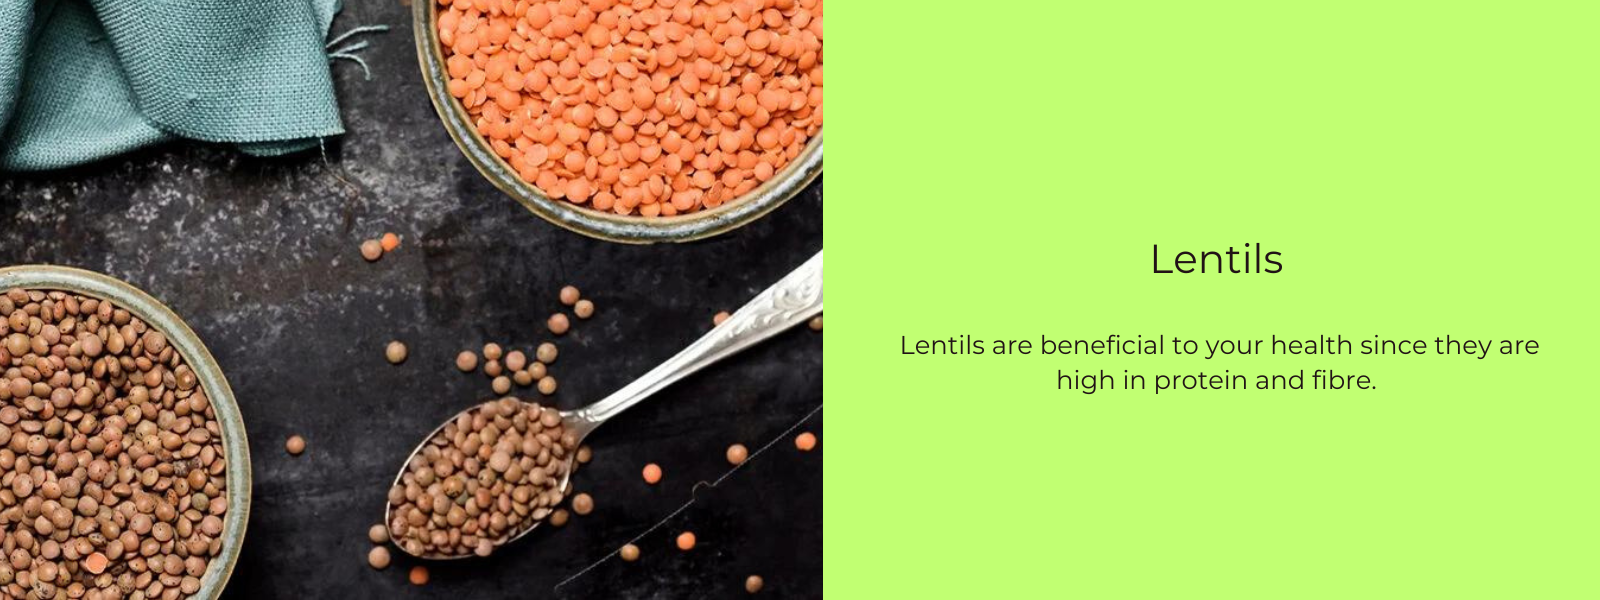 Lentils – Health Benefits, Uses and Important Facts